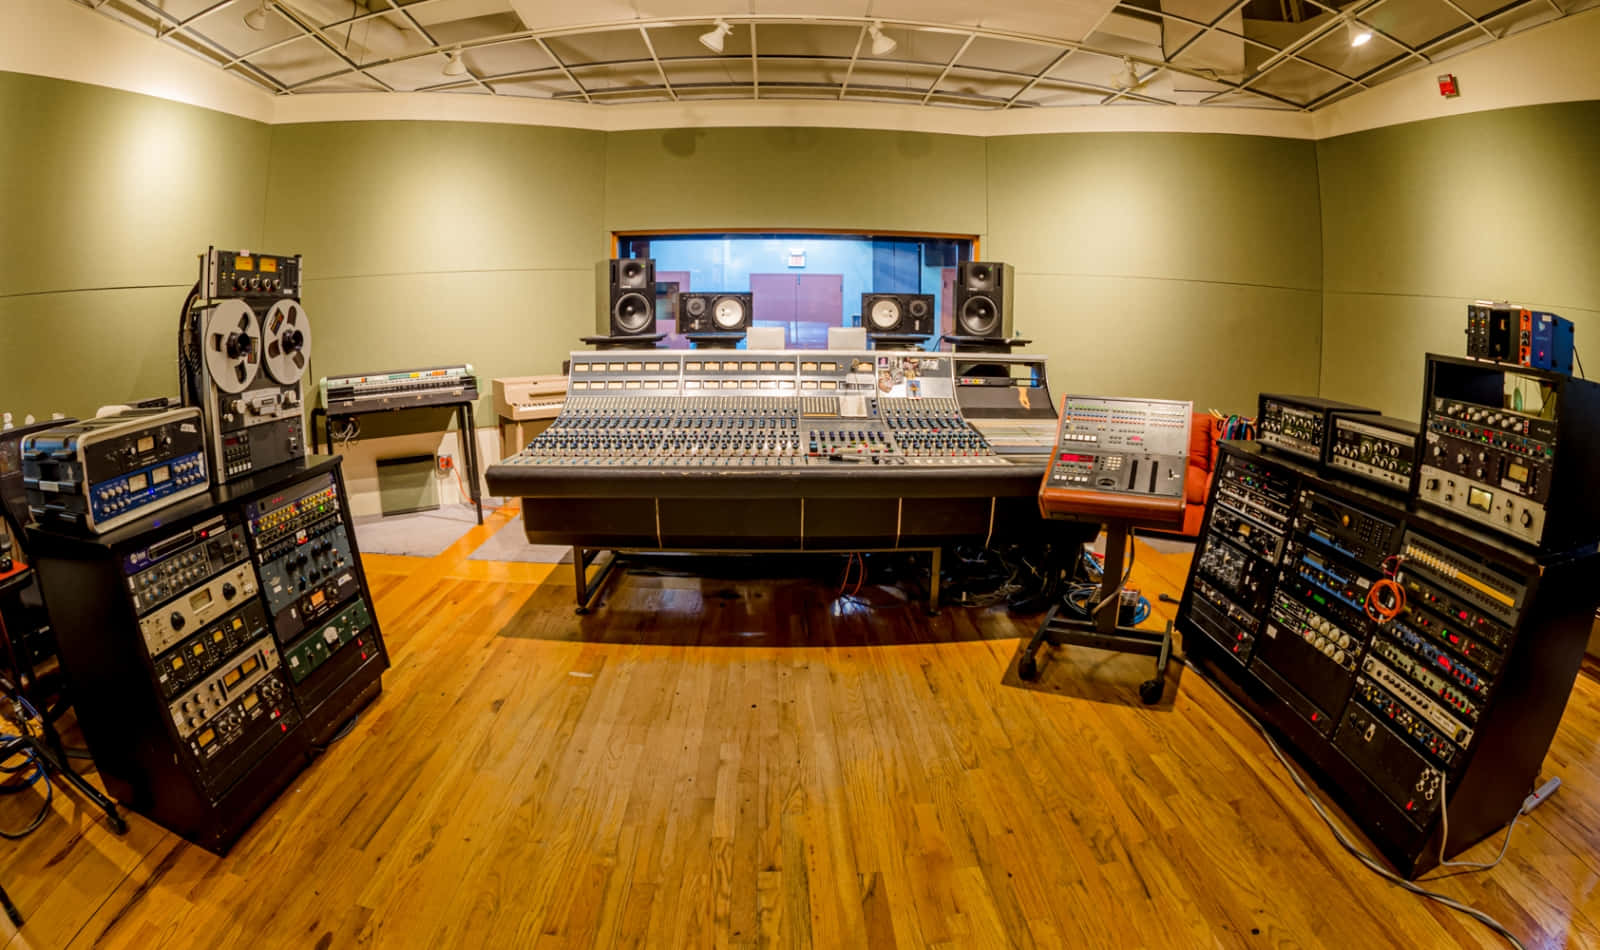 Record your audio creations in our state-of-the-art Recording Studio